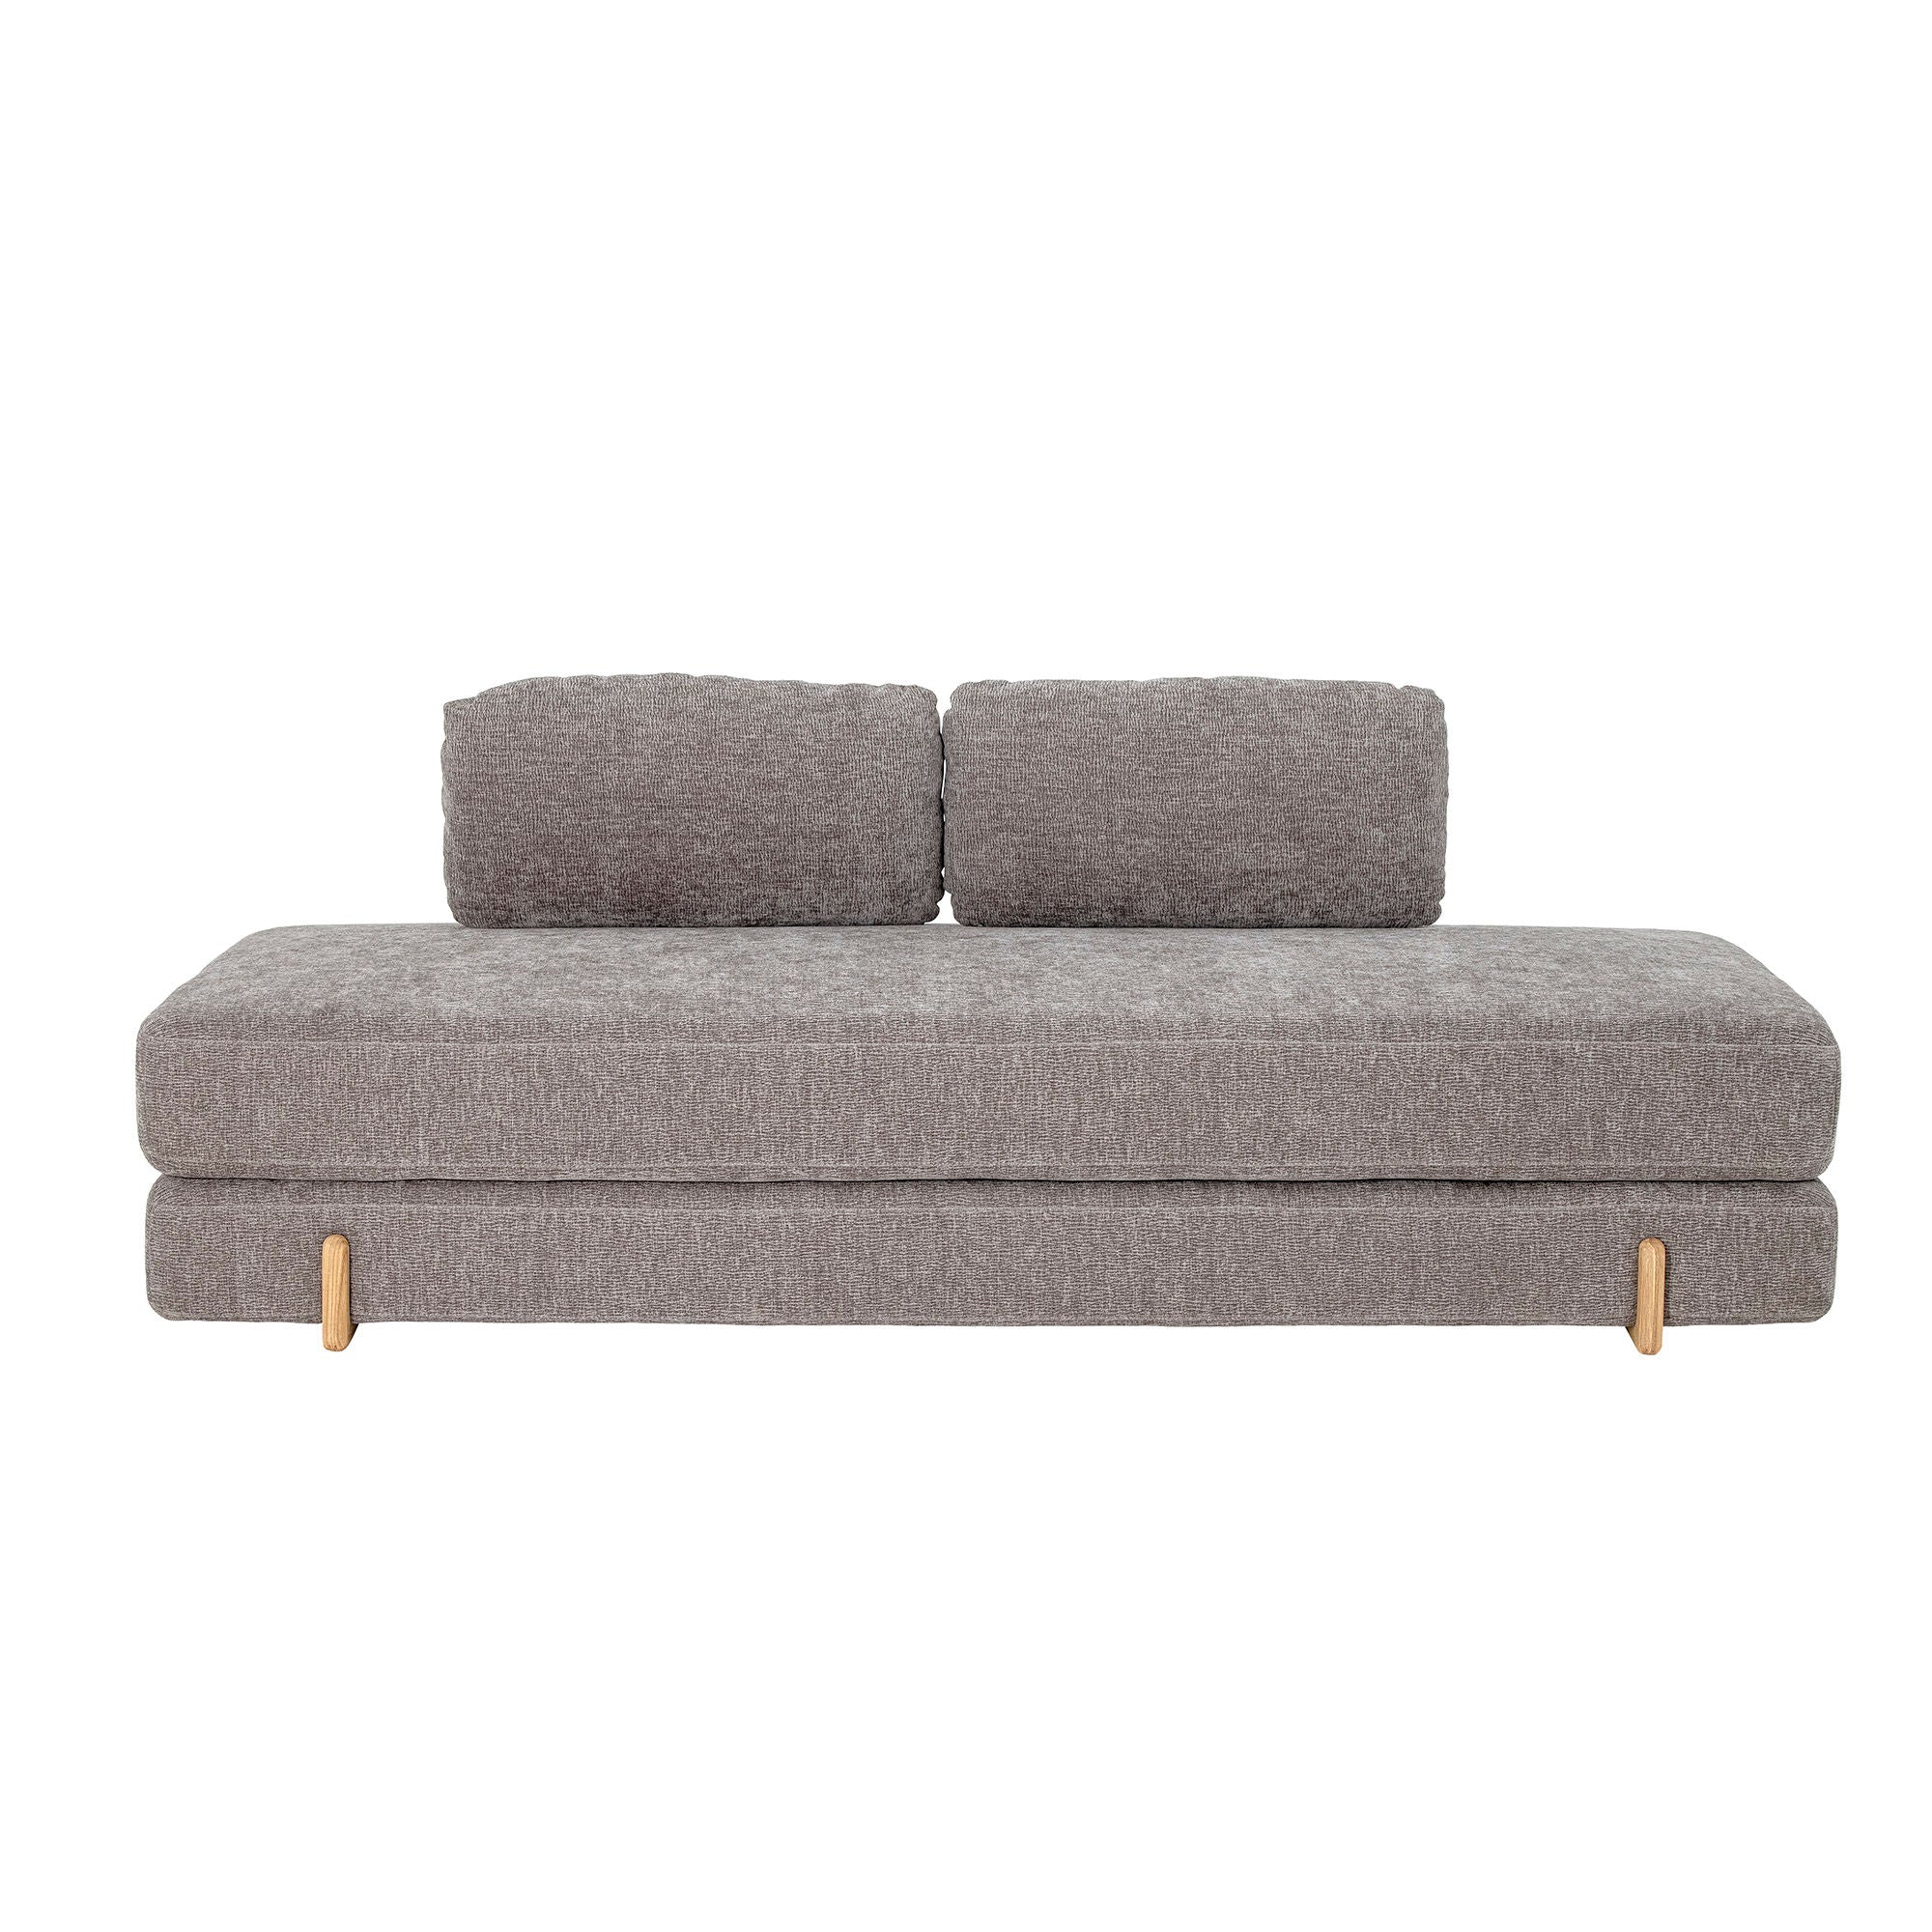 Bloomingville groove daybed, grigio, poliestere